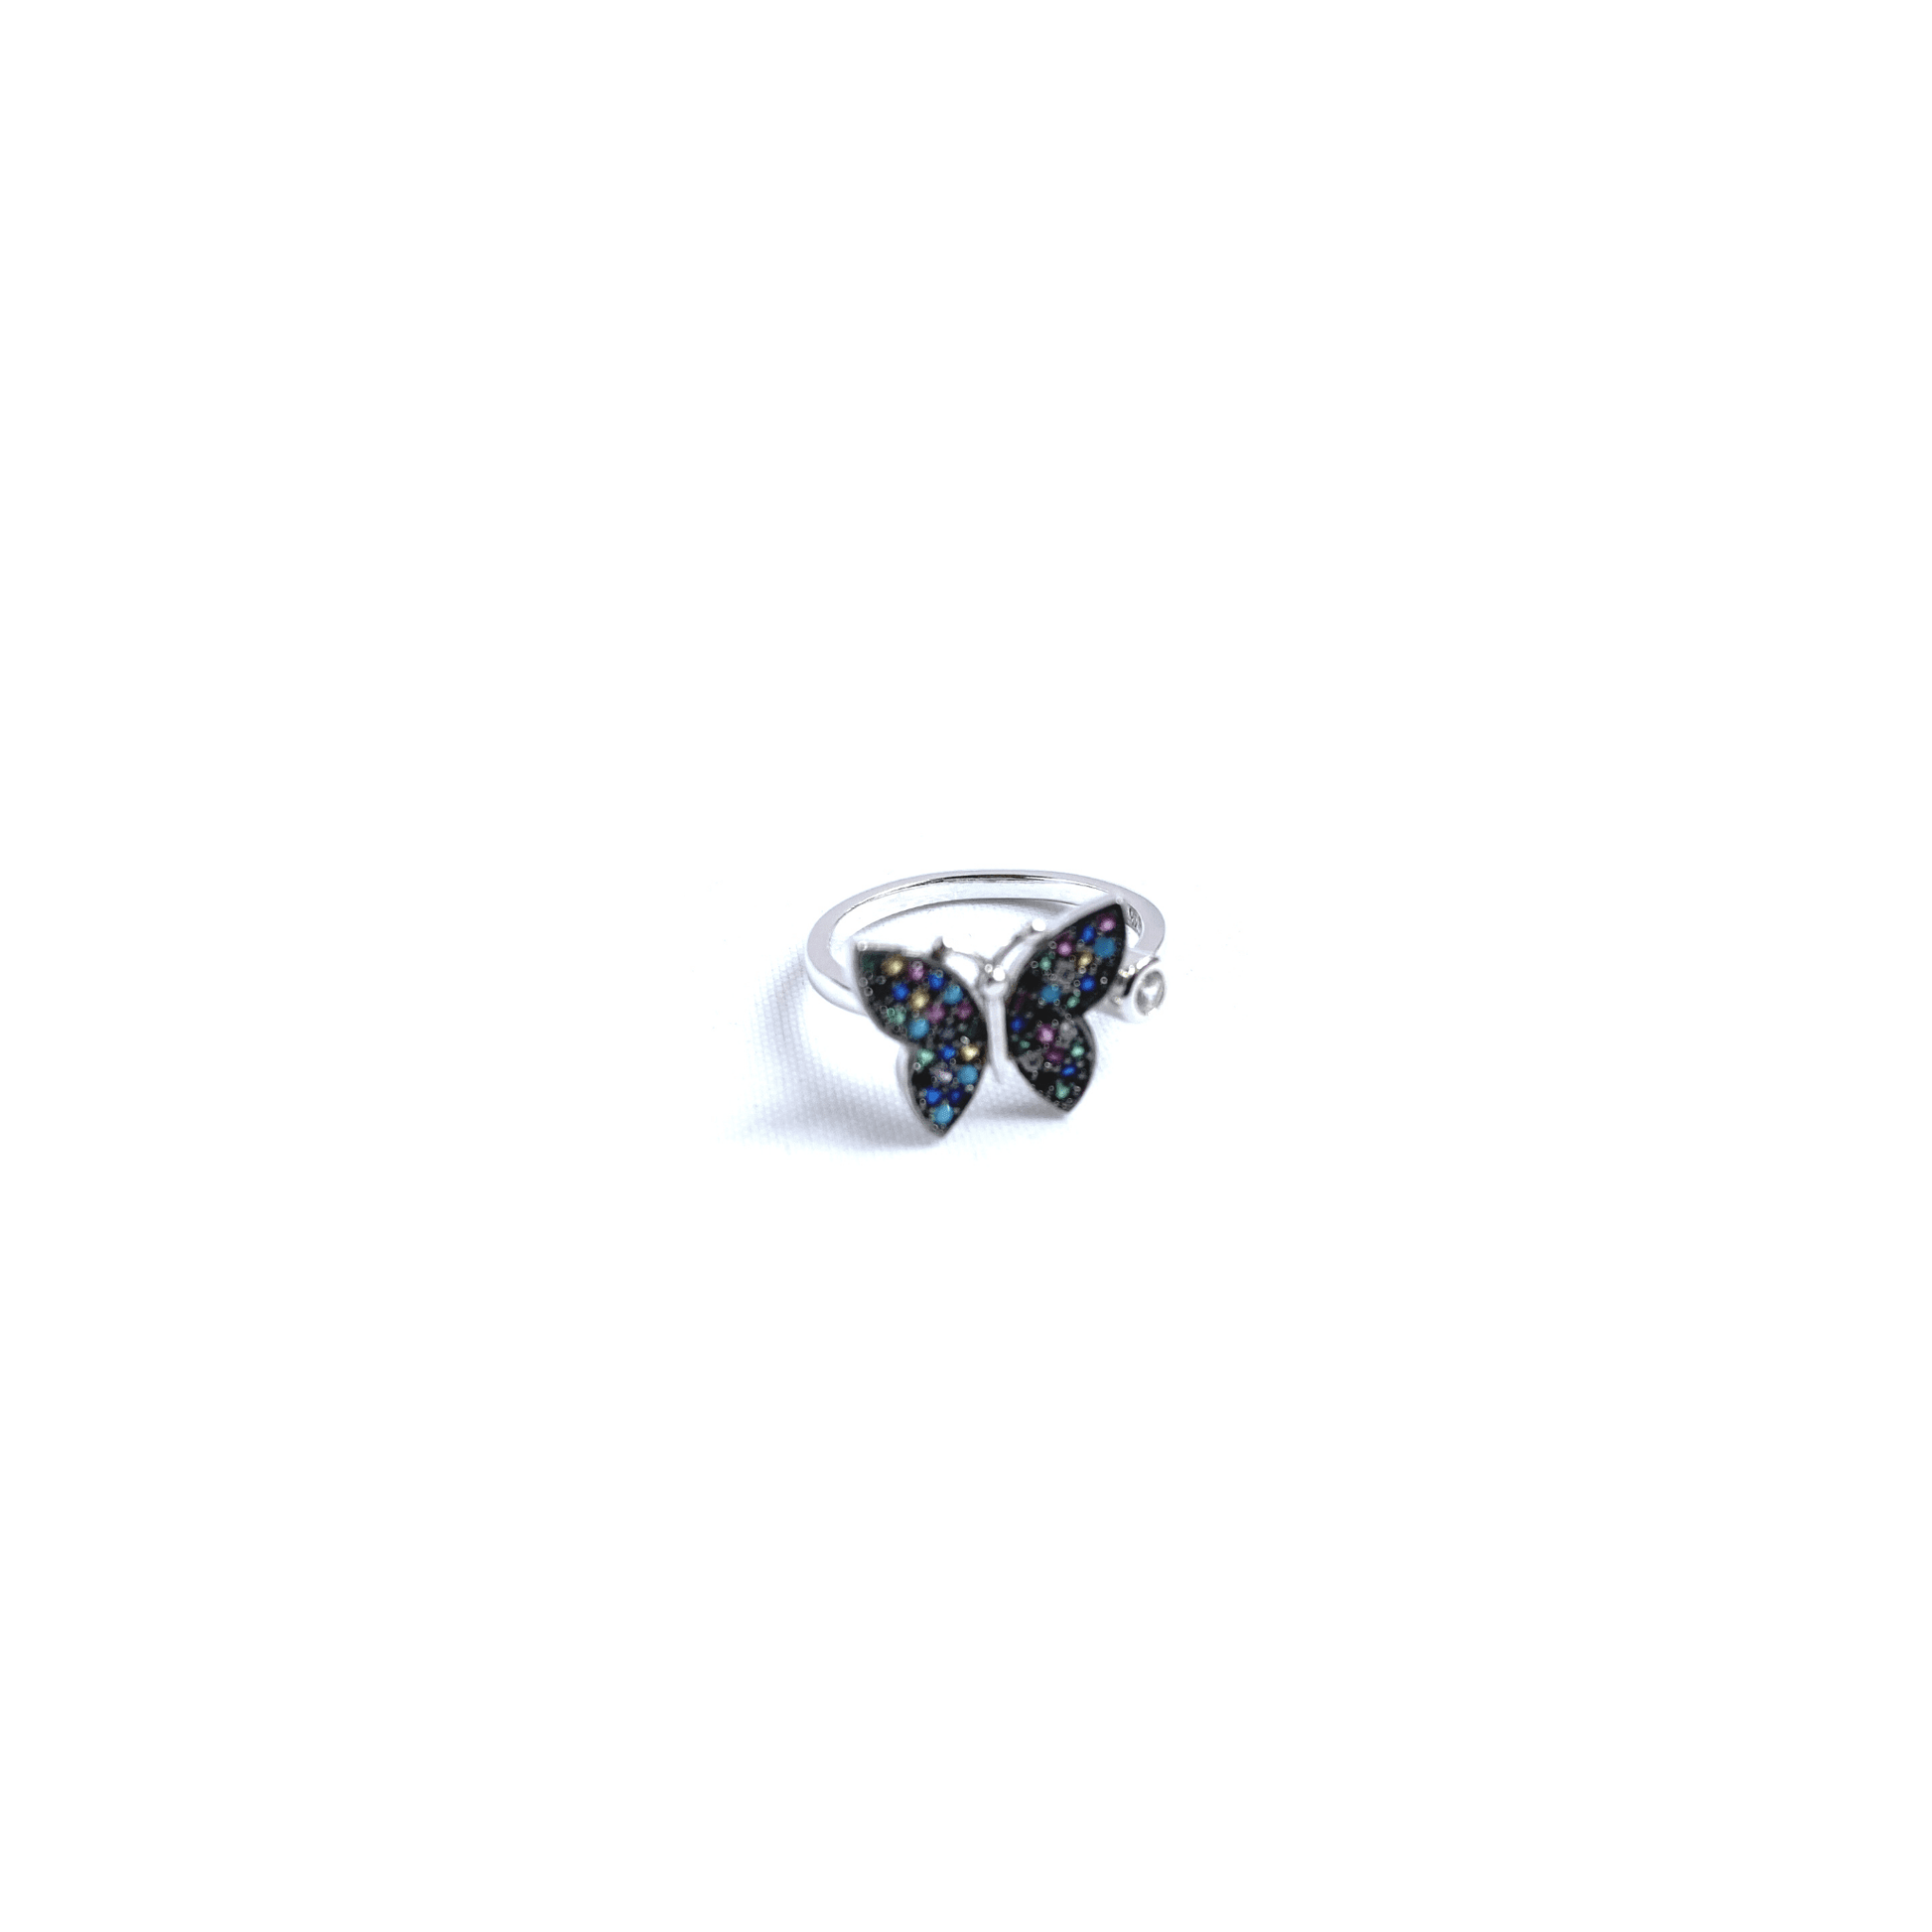 Butterfly Adjustable Ring 925 Sterling Silver with Cubic Zirconia Stones - Naked Nation UK